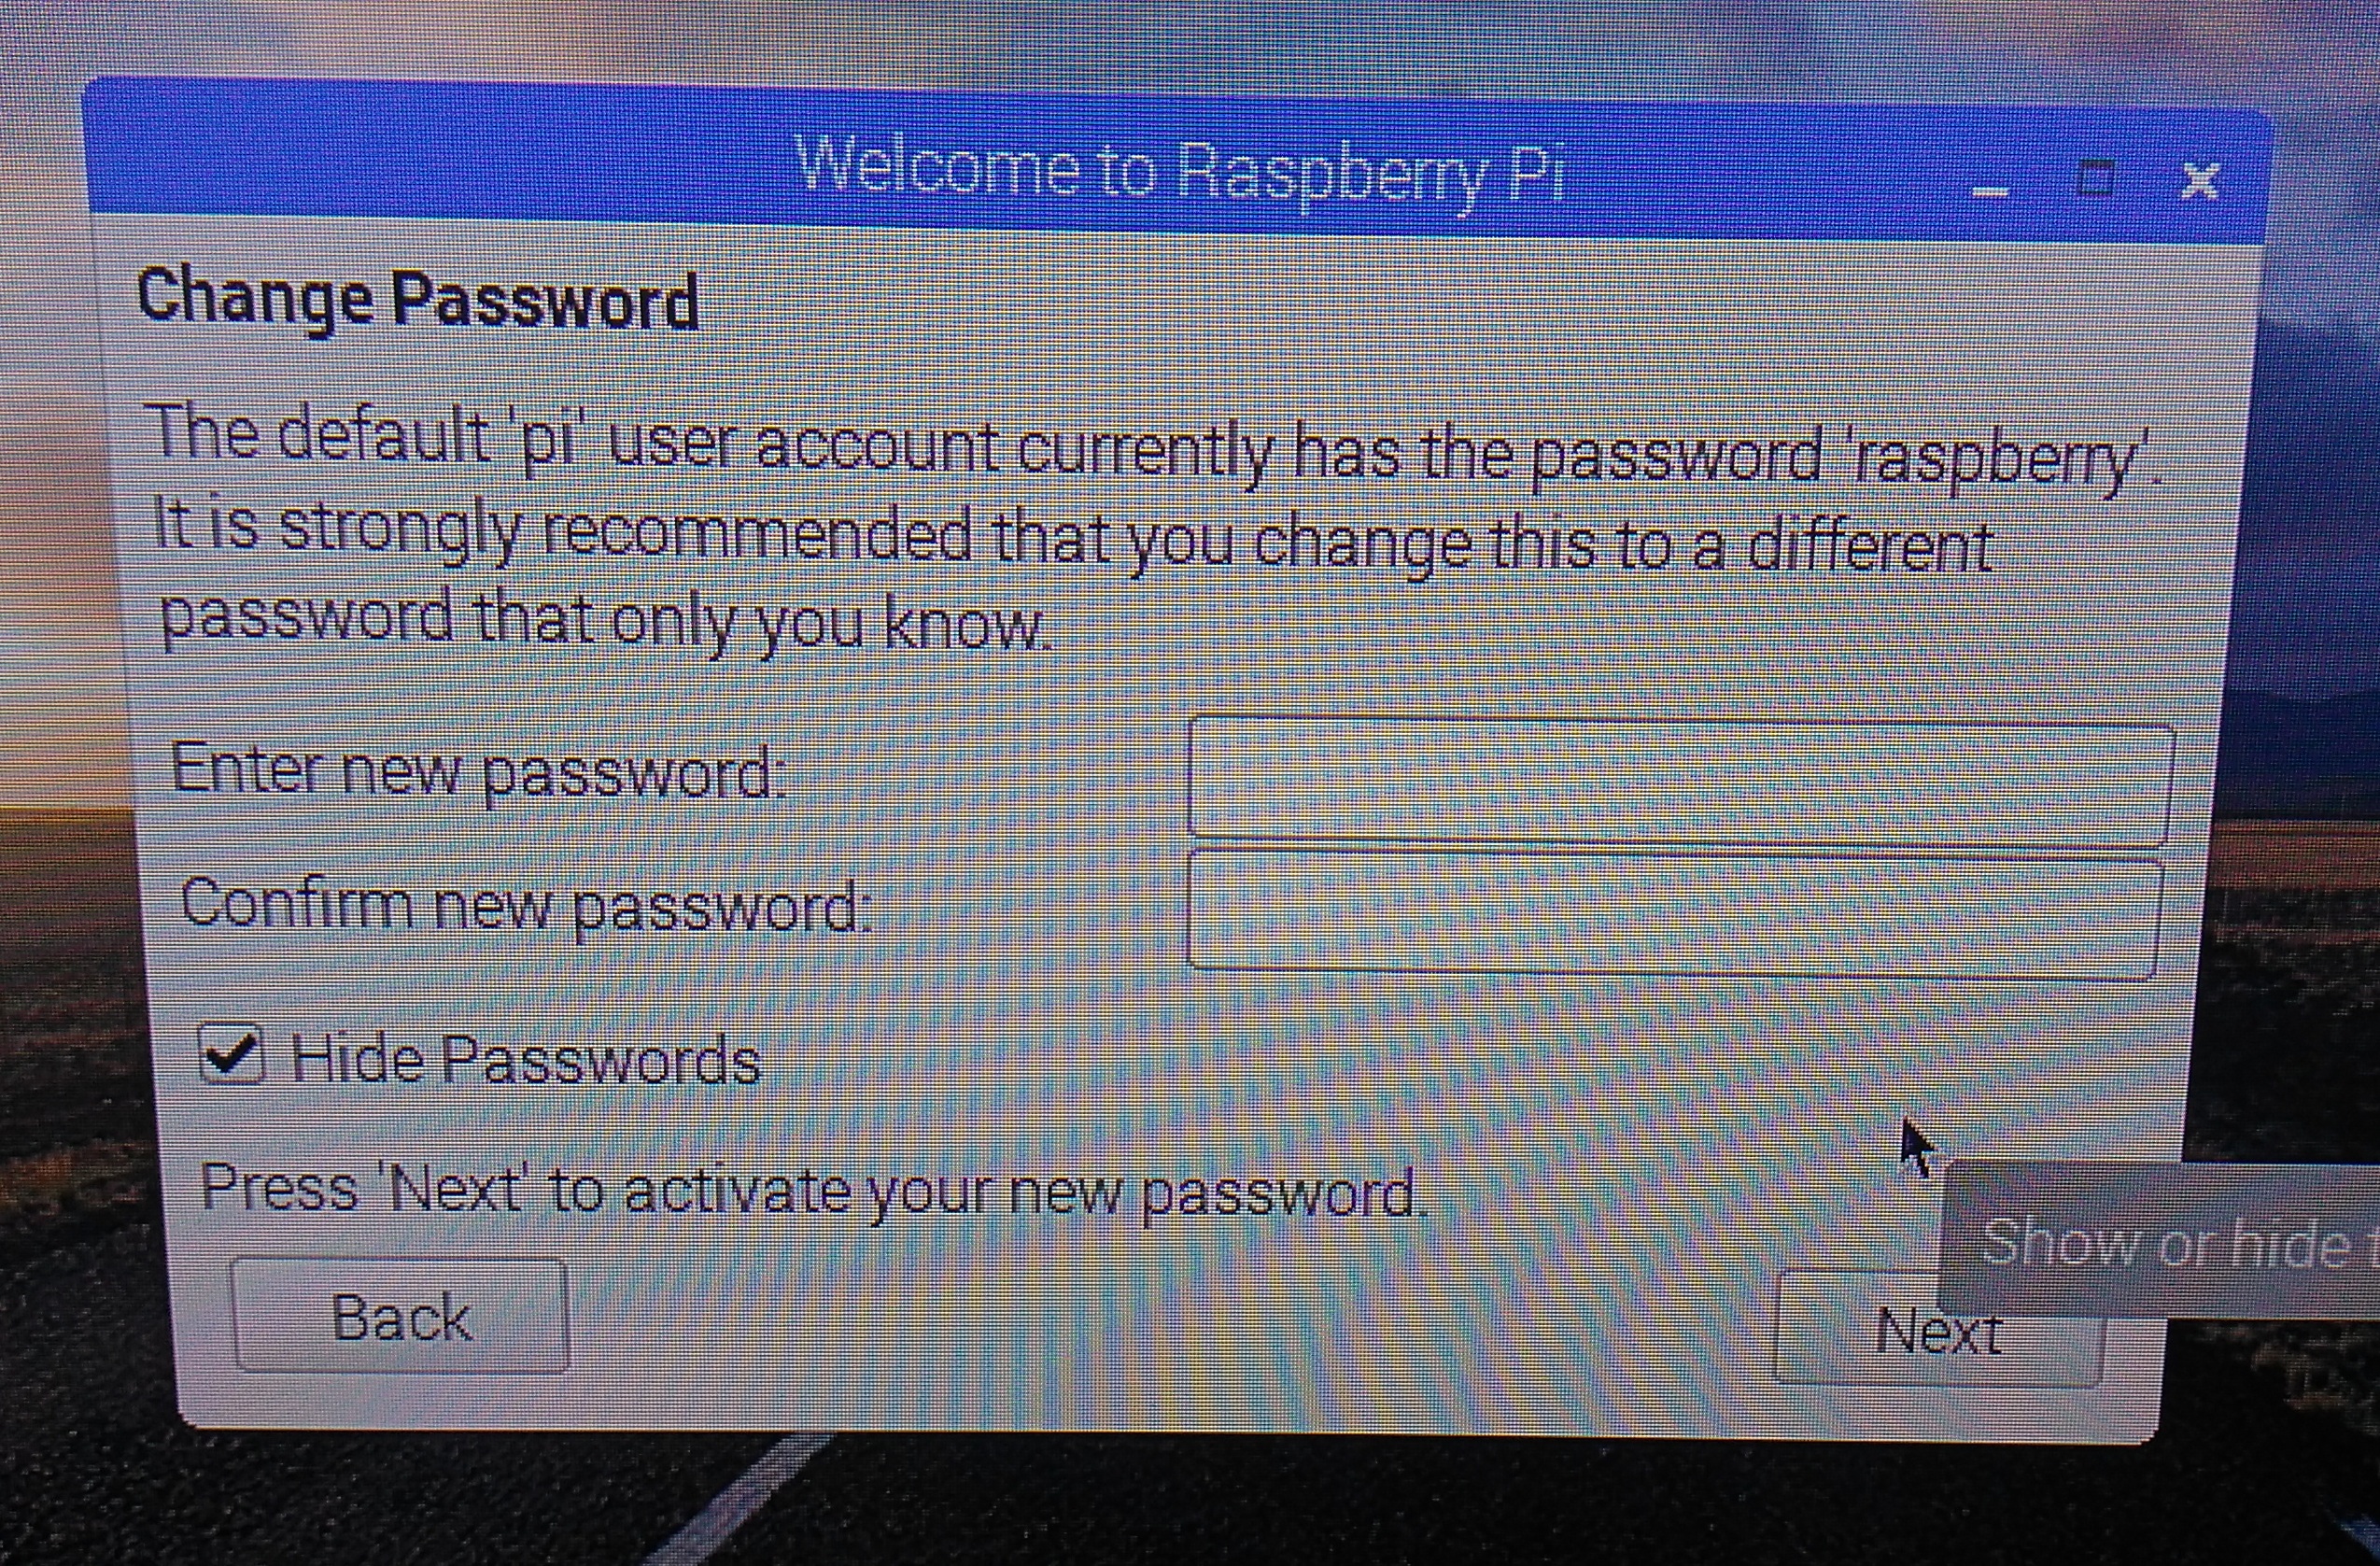 Different password. Password Passcode difference. Passwords are different.